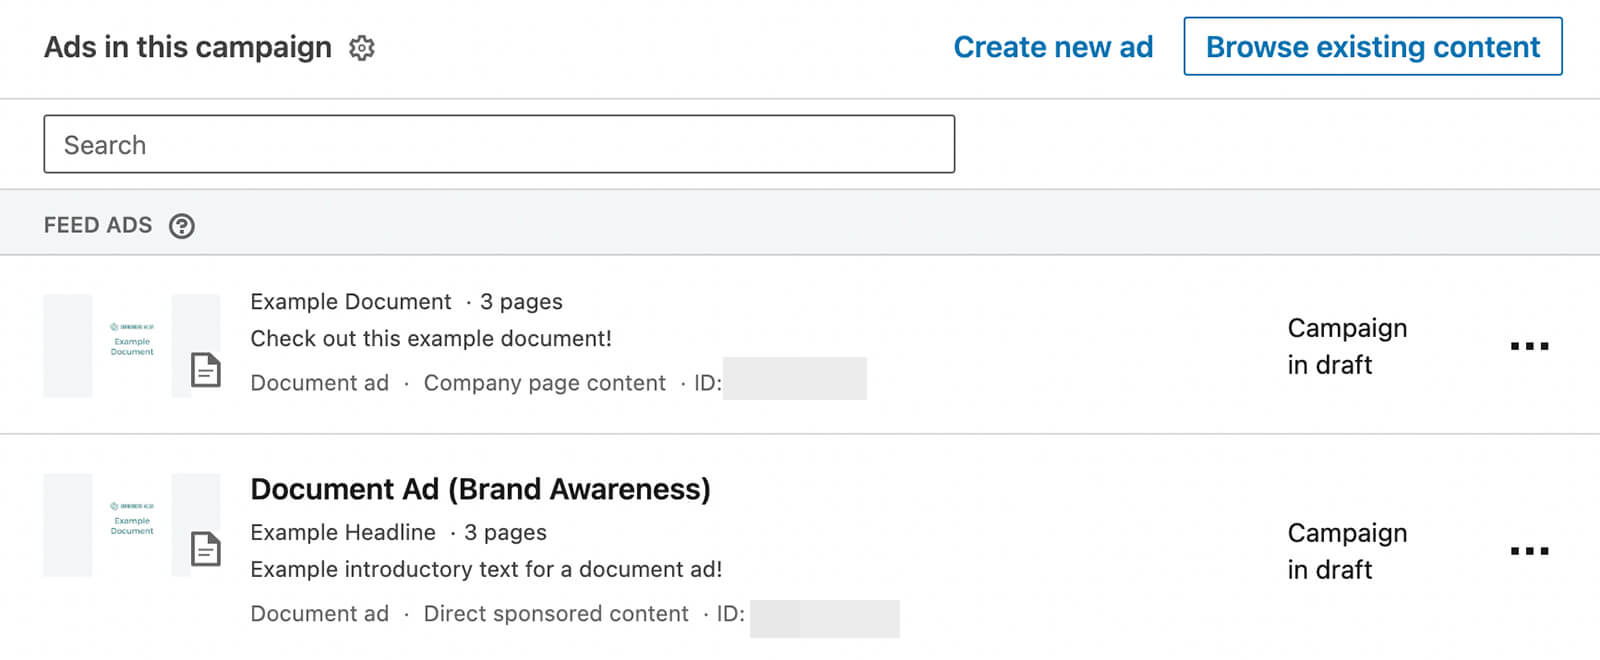 how-to-design-multiple-ads-with-linkedin-document-ads-create-new-ad-browse-existing-content-mix-and-match-organic-content-example-13